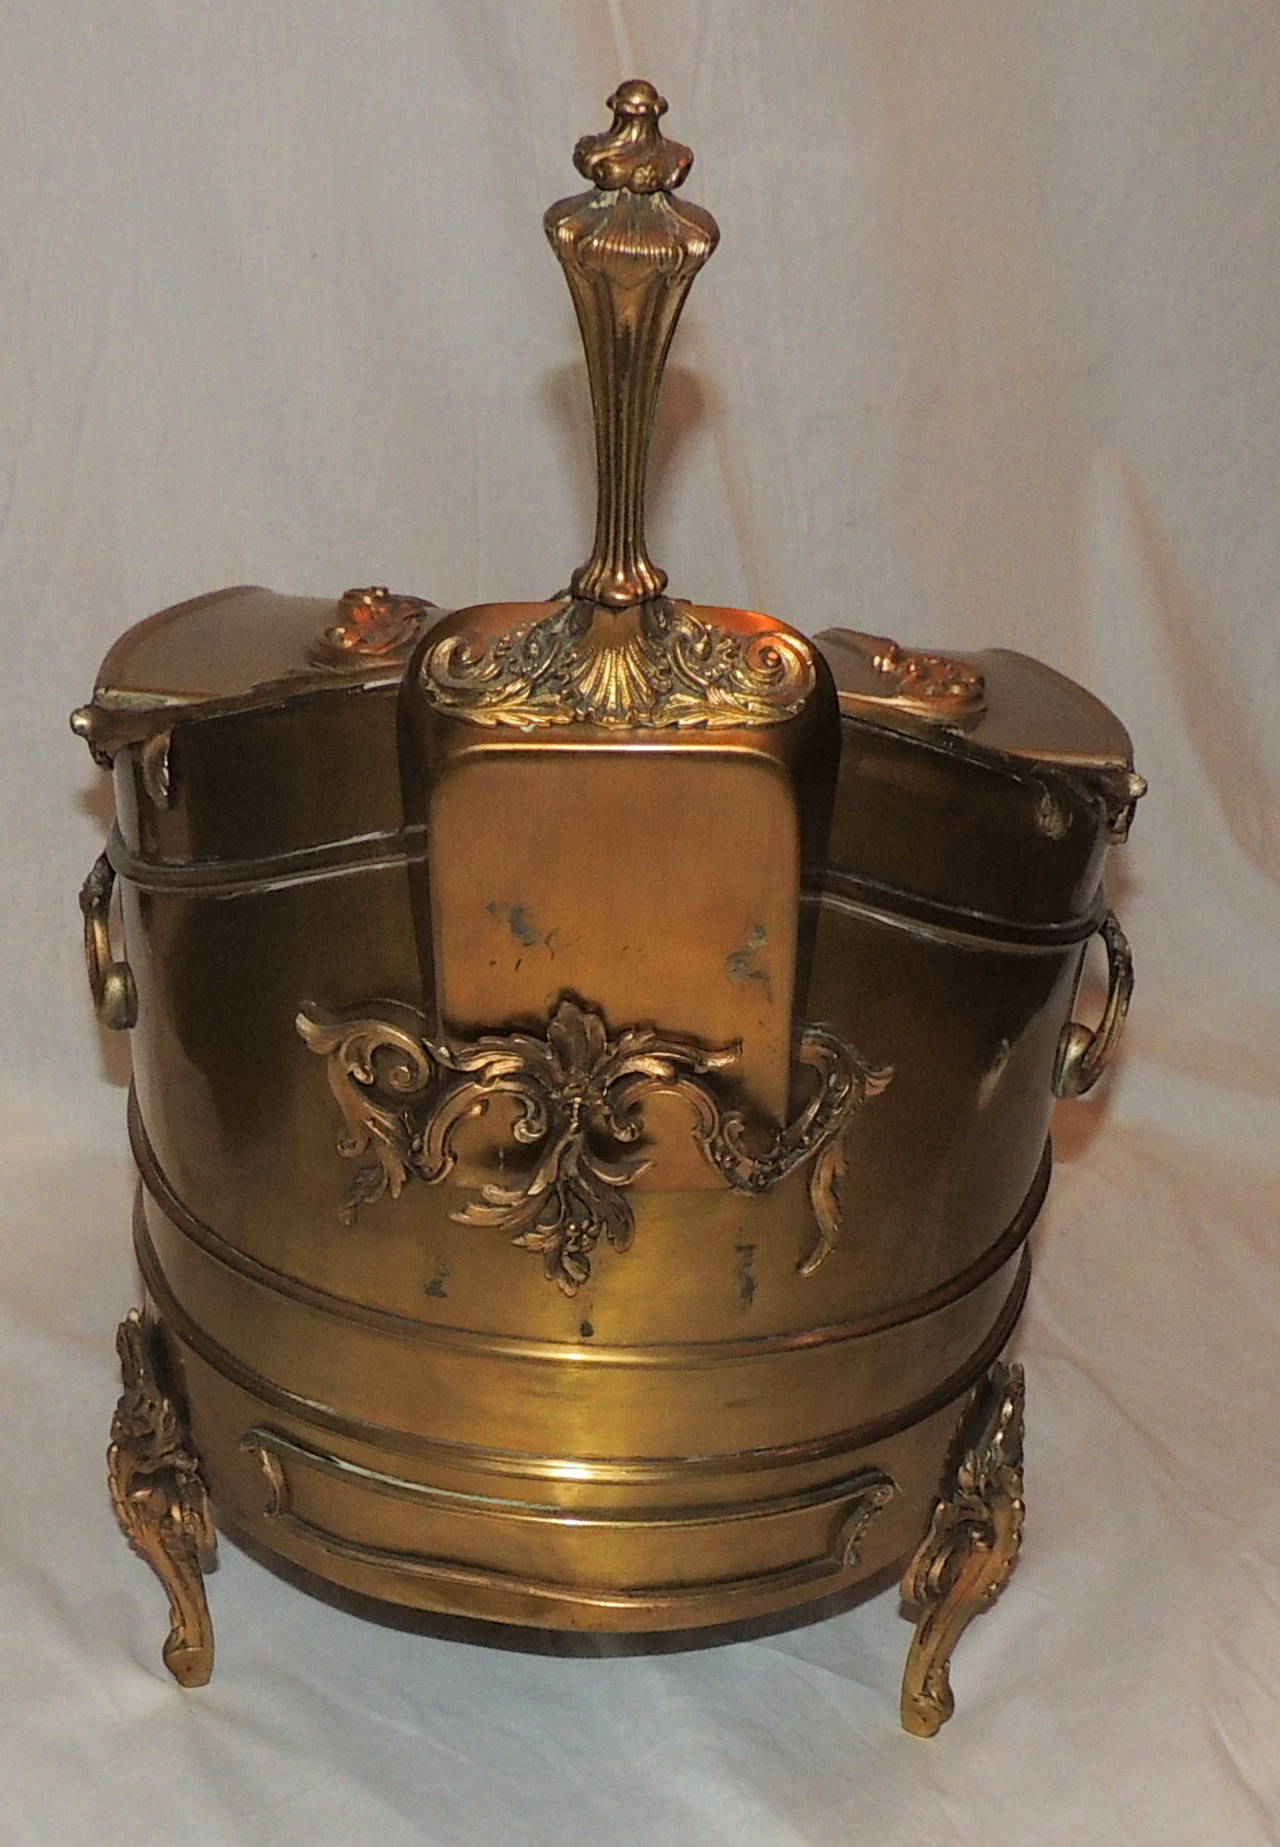 Early 20th Century Wonderful French Bronze Brass Coal Scuttle Box with Original Insert and Shovel